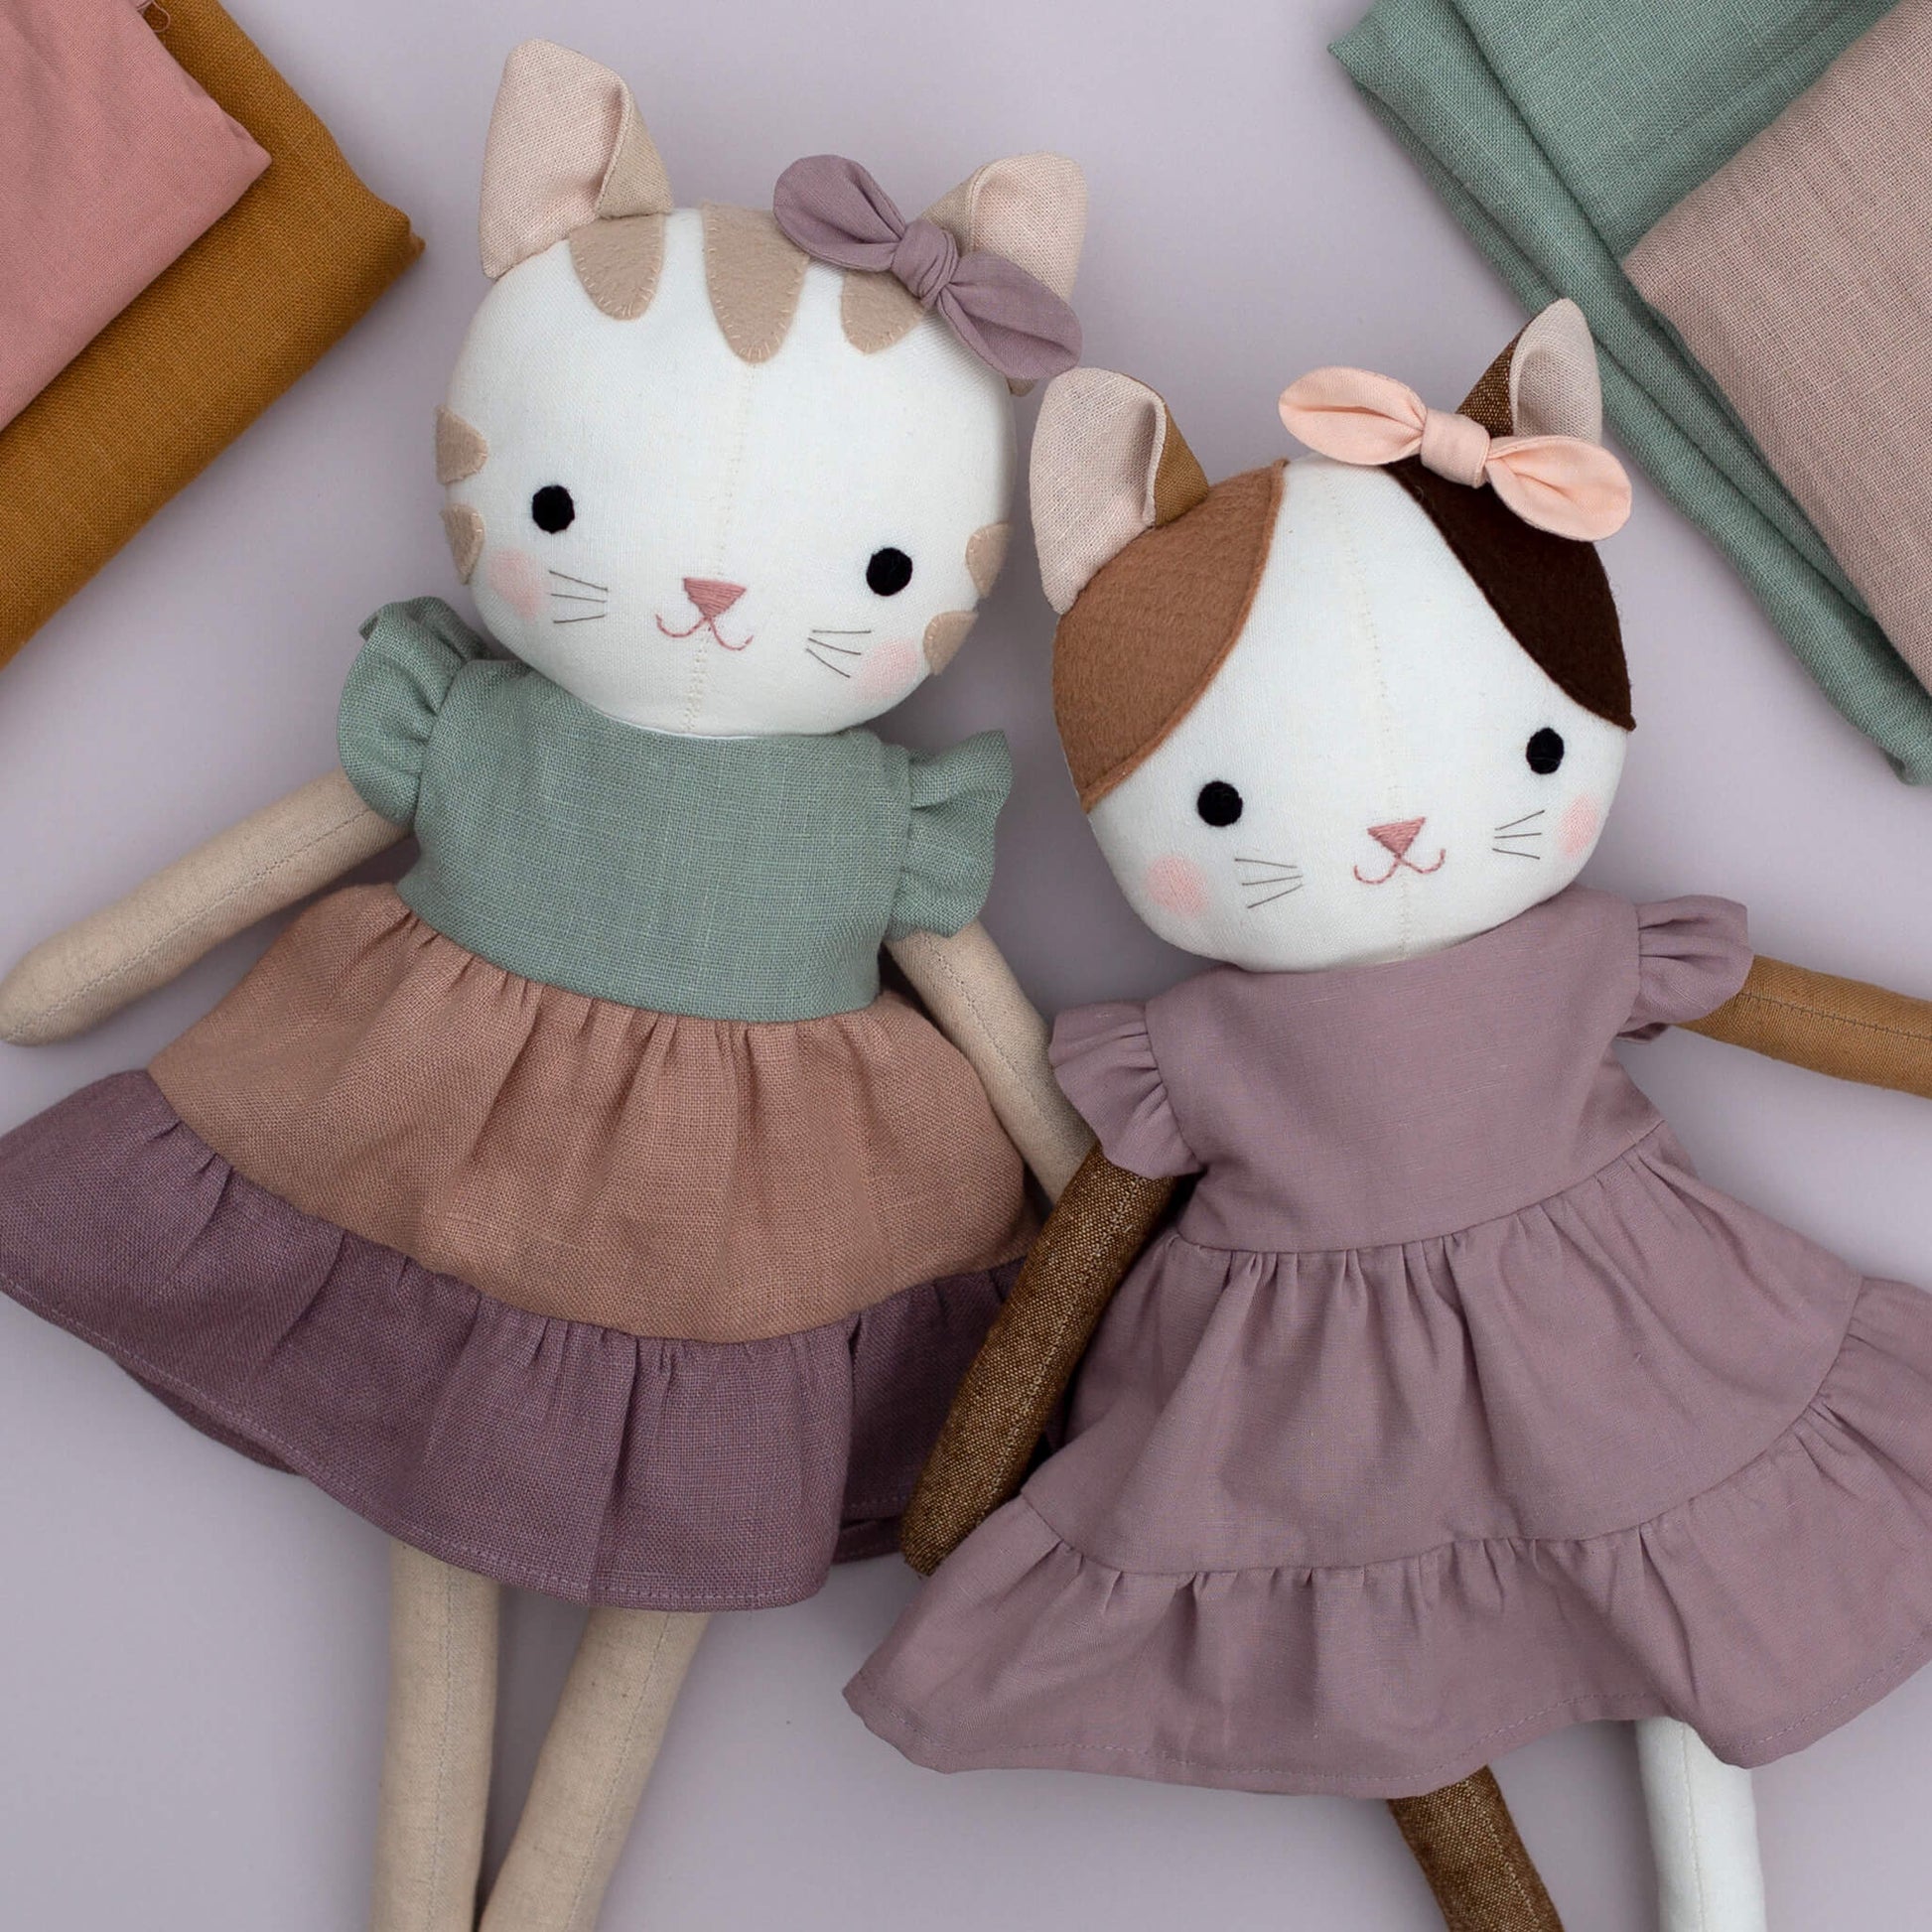 Free stuffed cat sewing pattern and tutorial